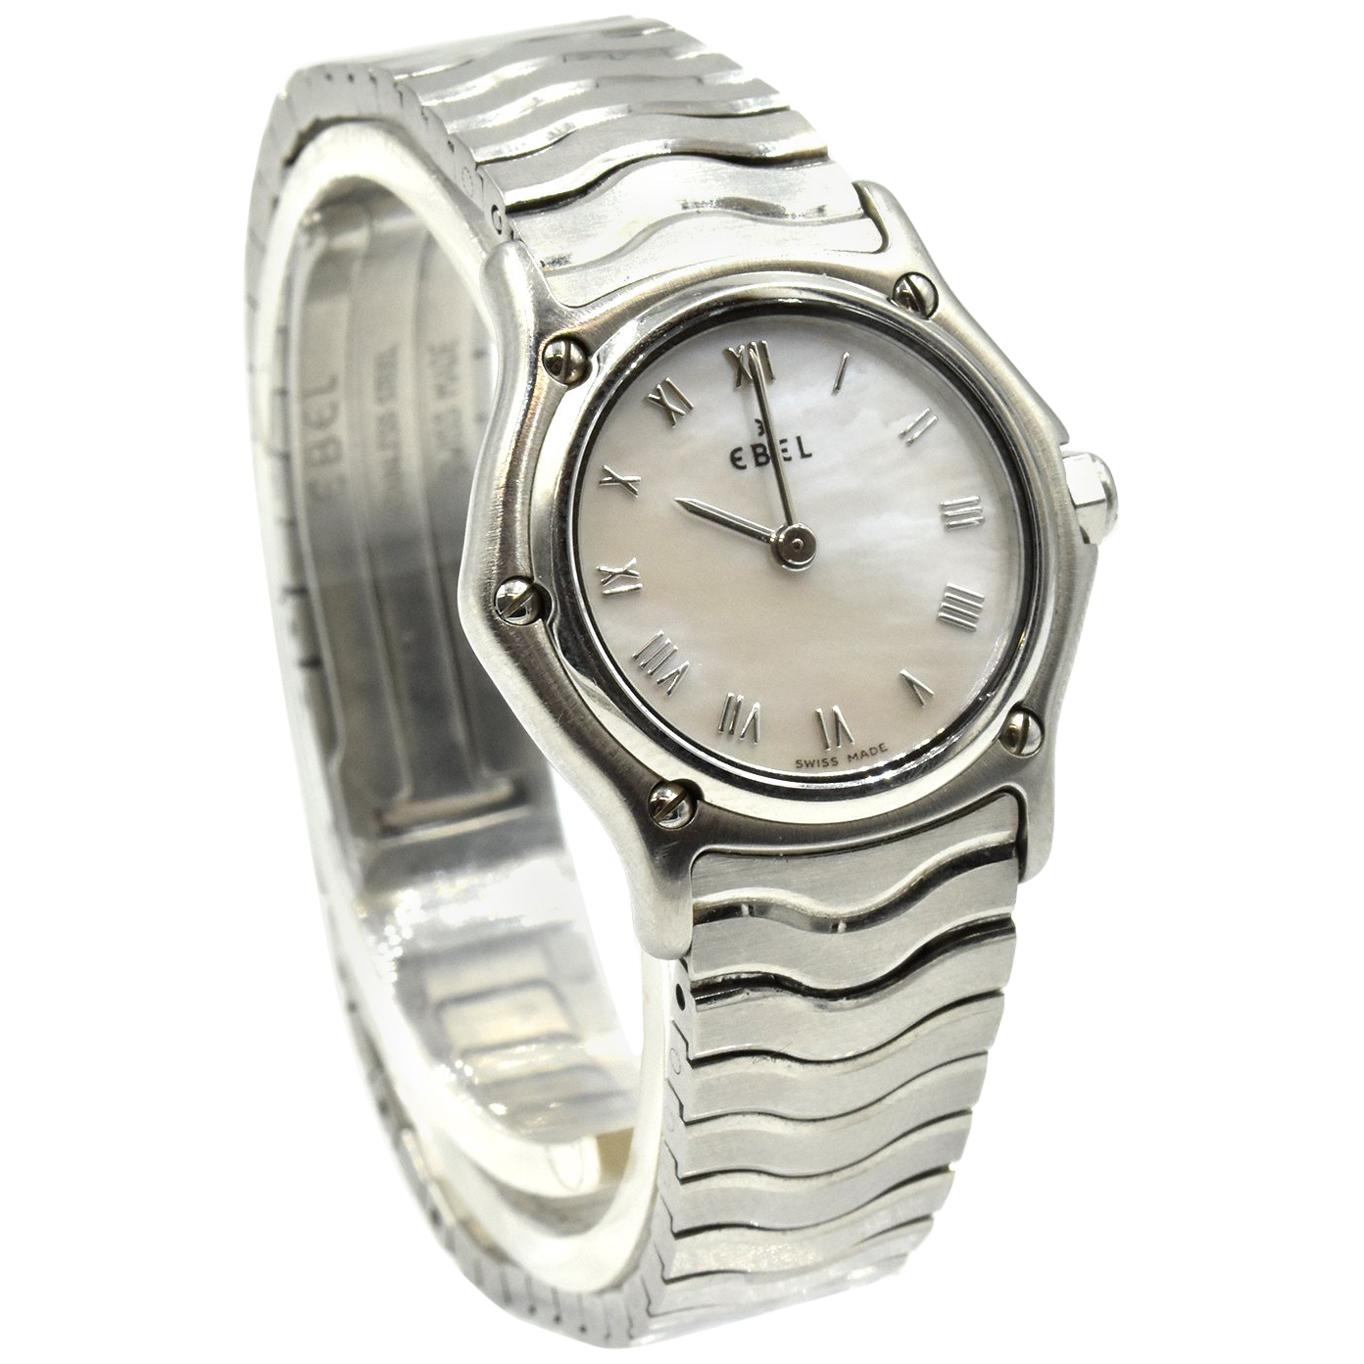 Ebel Classic Wave Stainless-Steel Ladies Wristwatch Ref 9157111